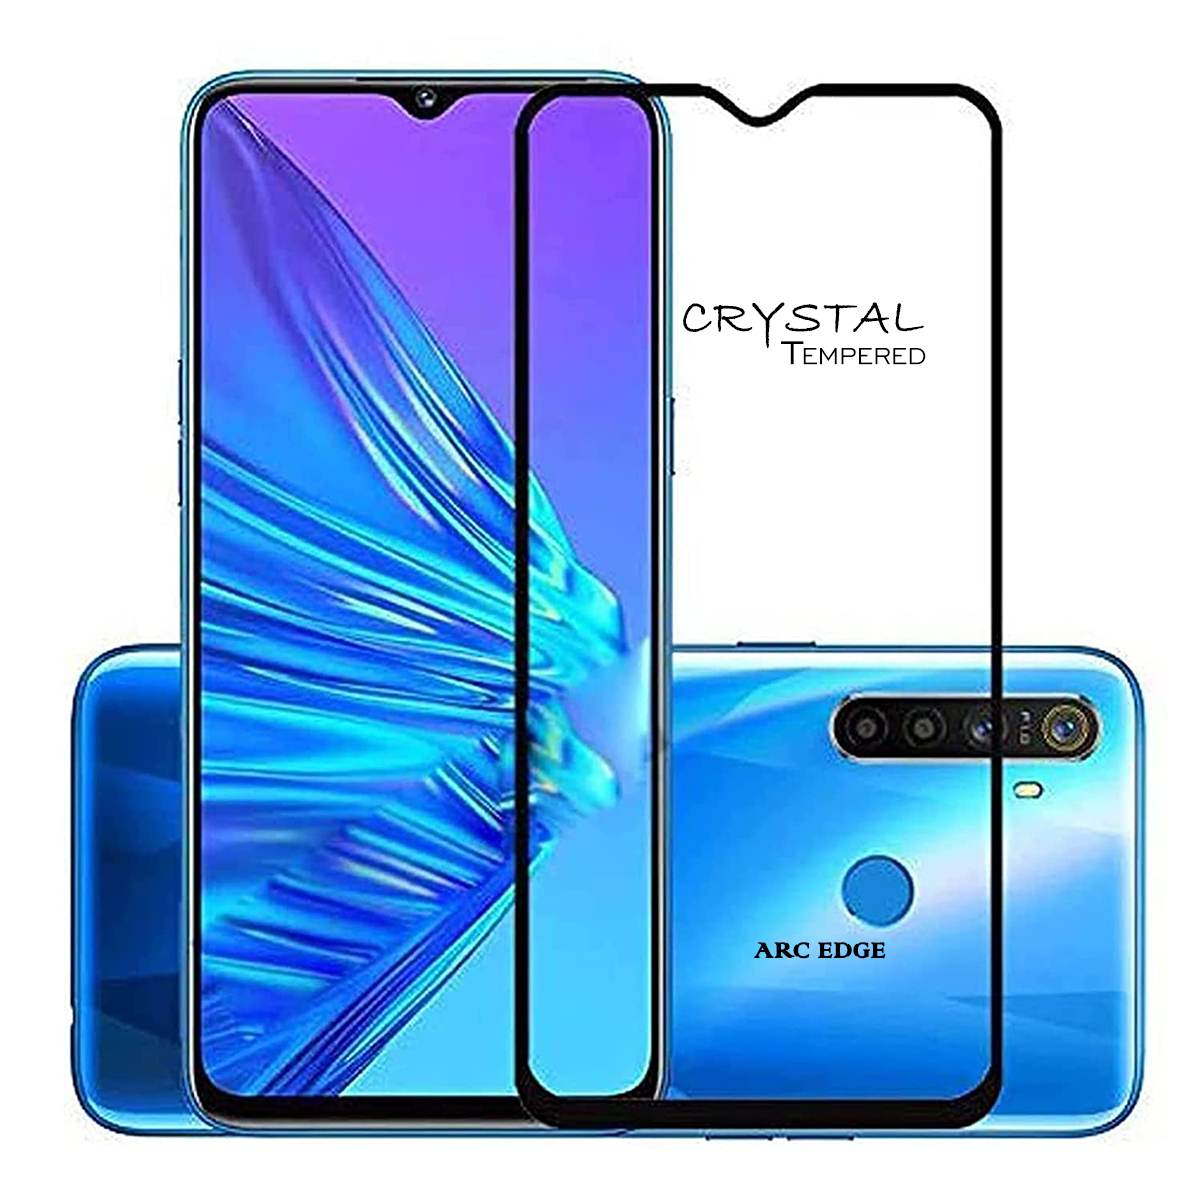 iFix Crystal 5D Tempered Glass for OPPO REALME 5 PRO/X2